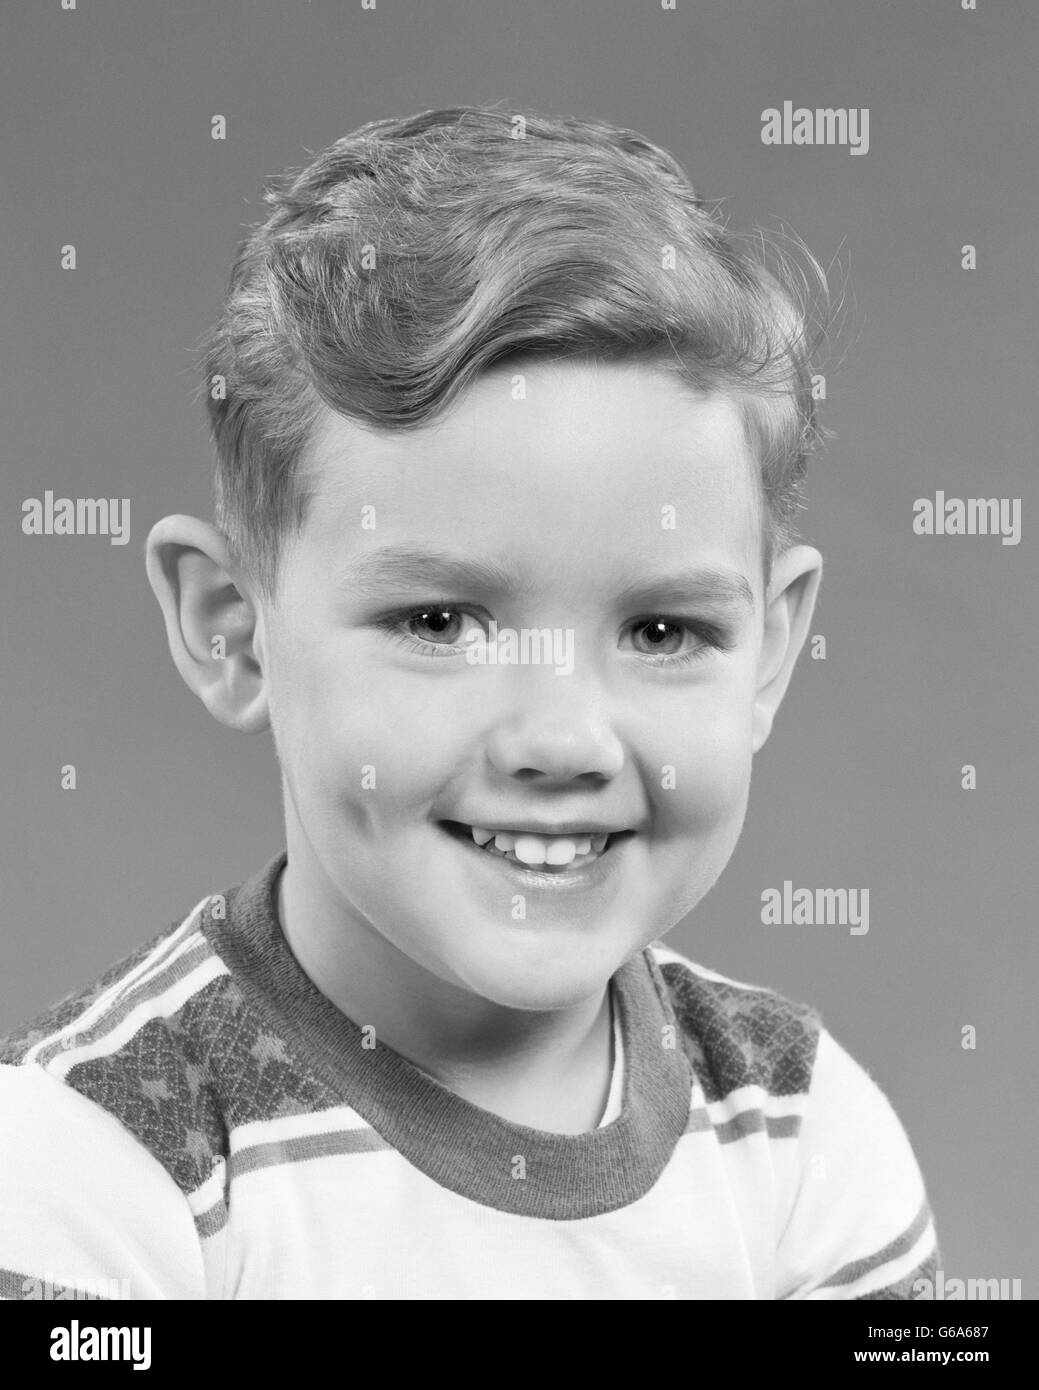 1950s PORTRAIT SMILING BOY LOOKING AT CAMERA WEARING STRIPED TEE SHIRT Stock Photo